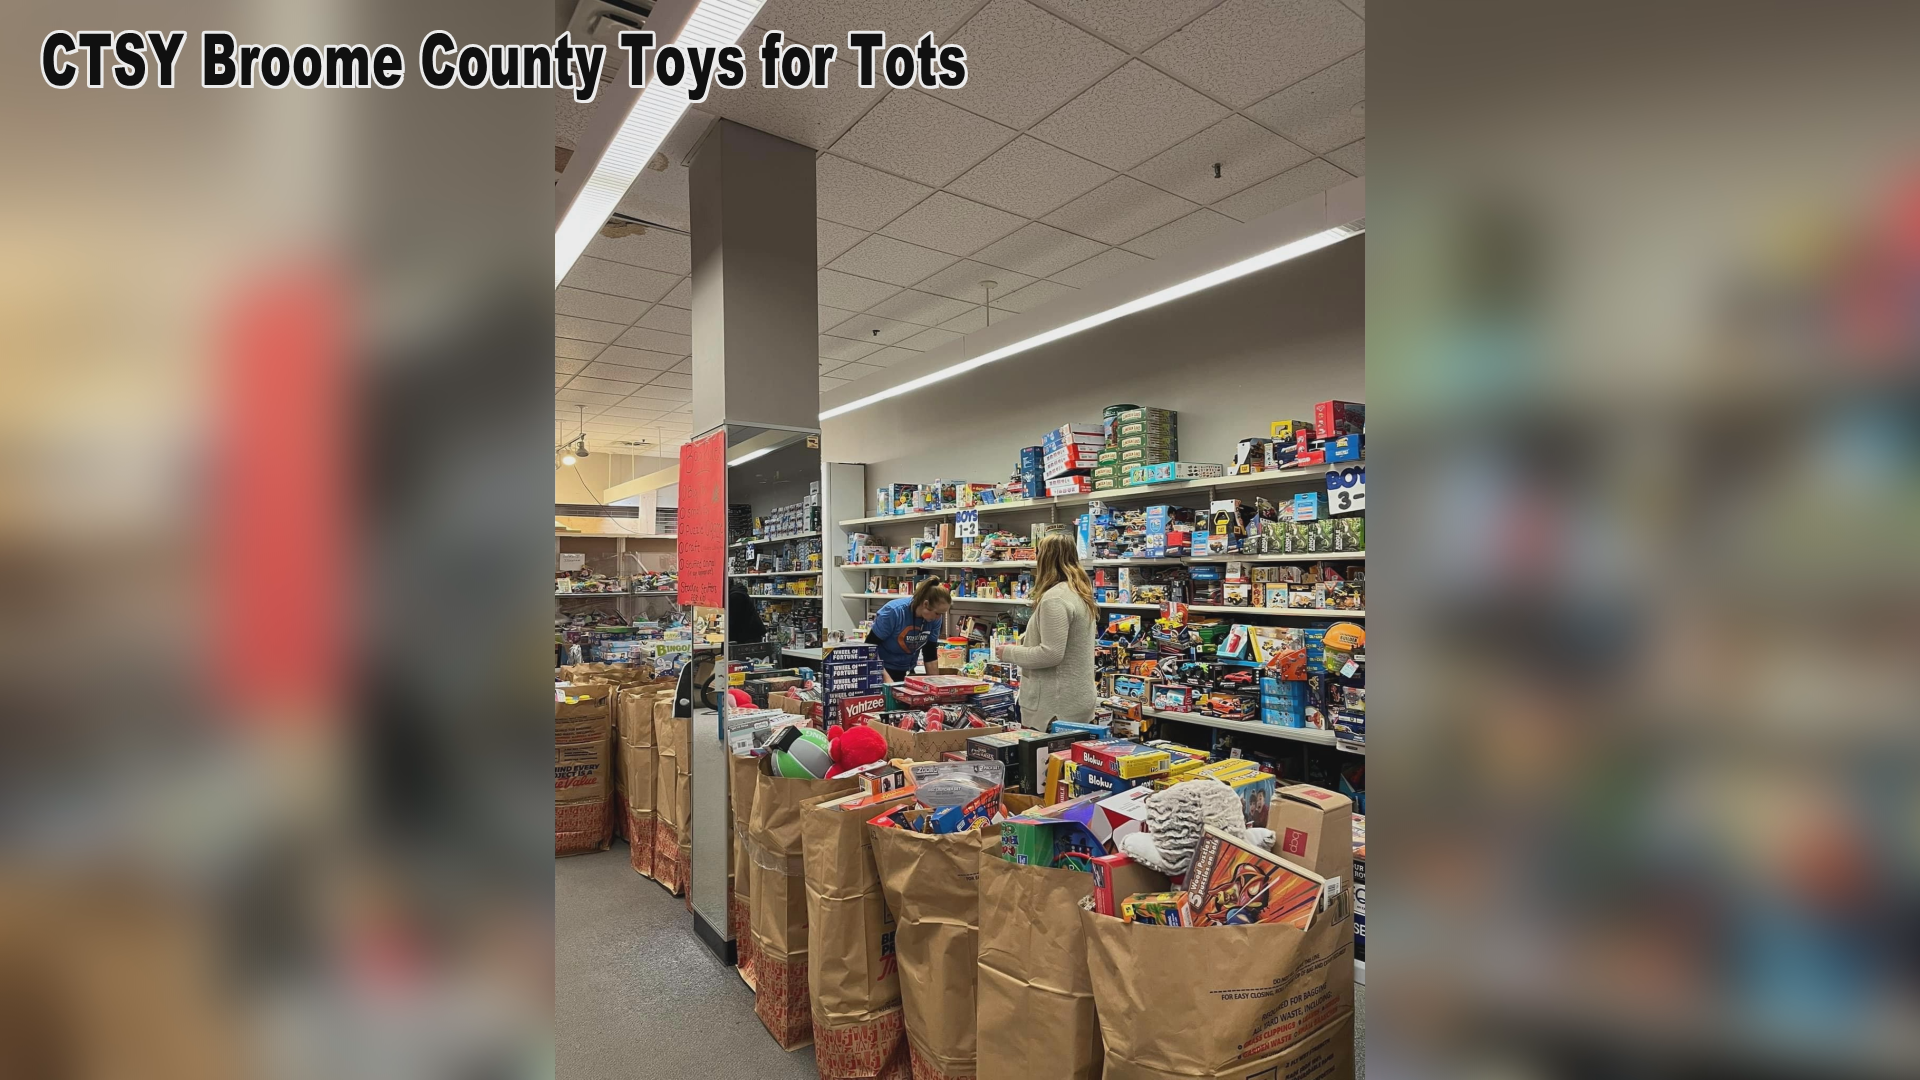 Broome County Toys For Tots